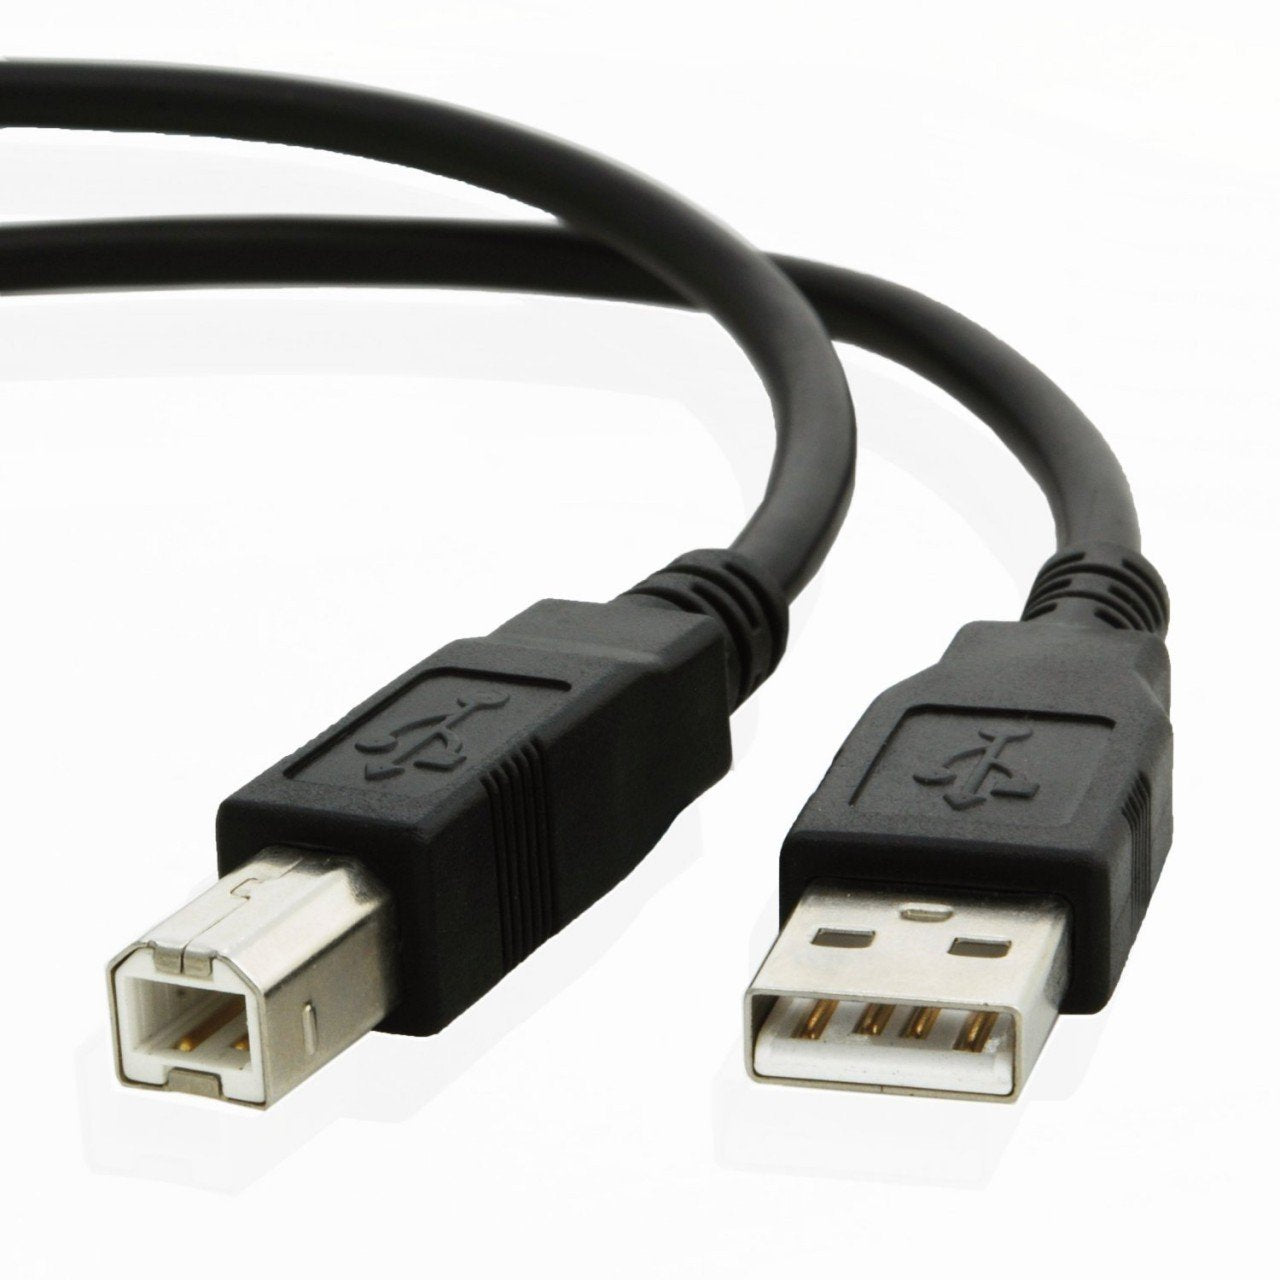 USB cable for Epson EX5250